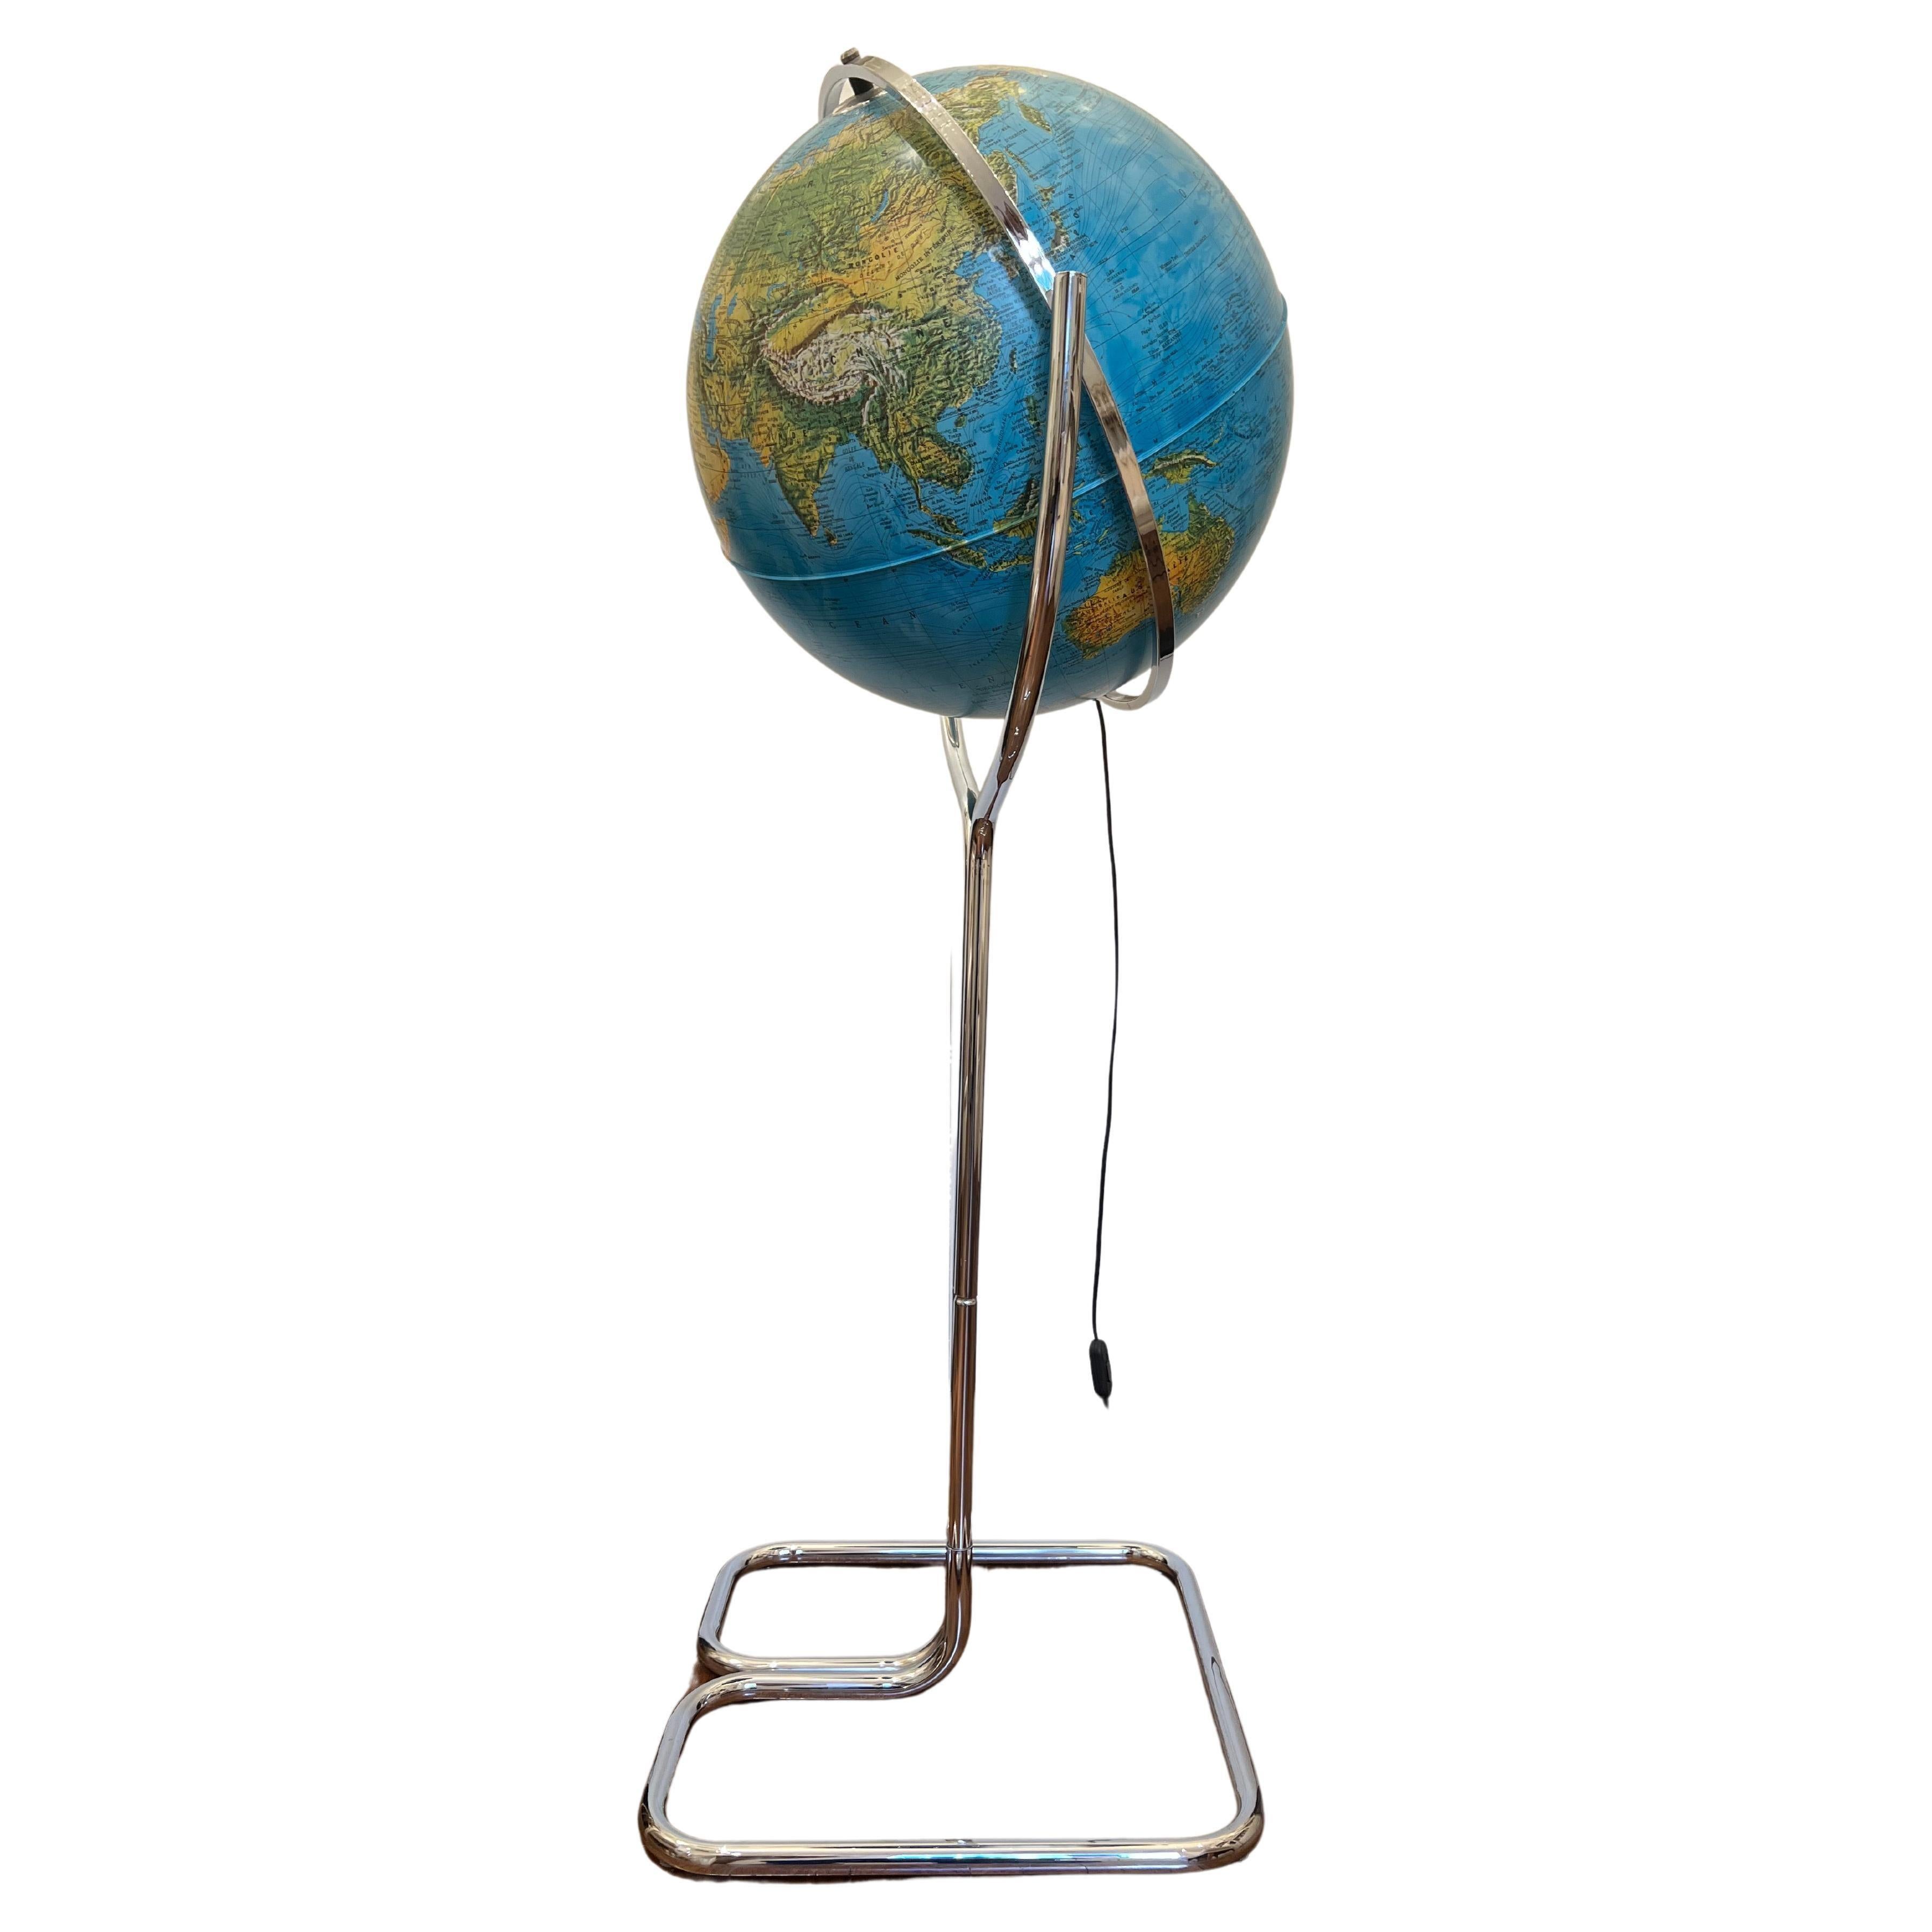 Unusual luminous globe on a large chromed metal base, made in Italy by Ricoscope Editions in Firenze.
In perfect condition, except for two very small missing pieces at the junction of the two half-globes (see last picture).
The globe by itself